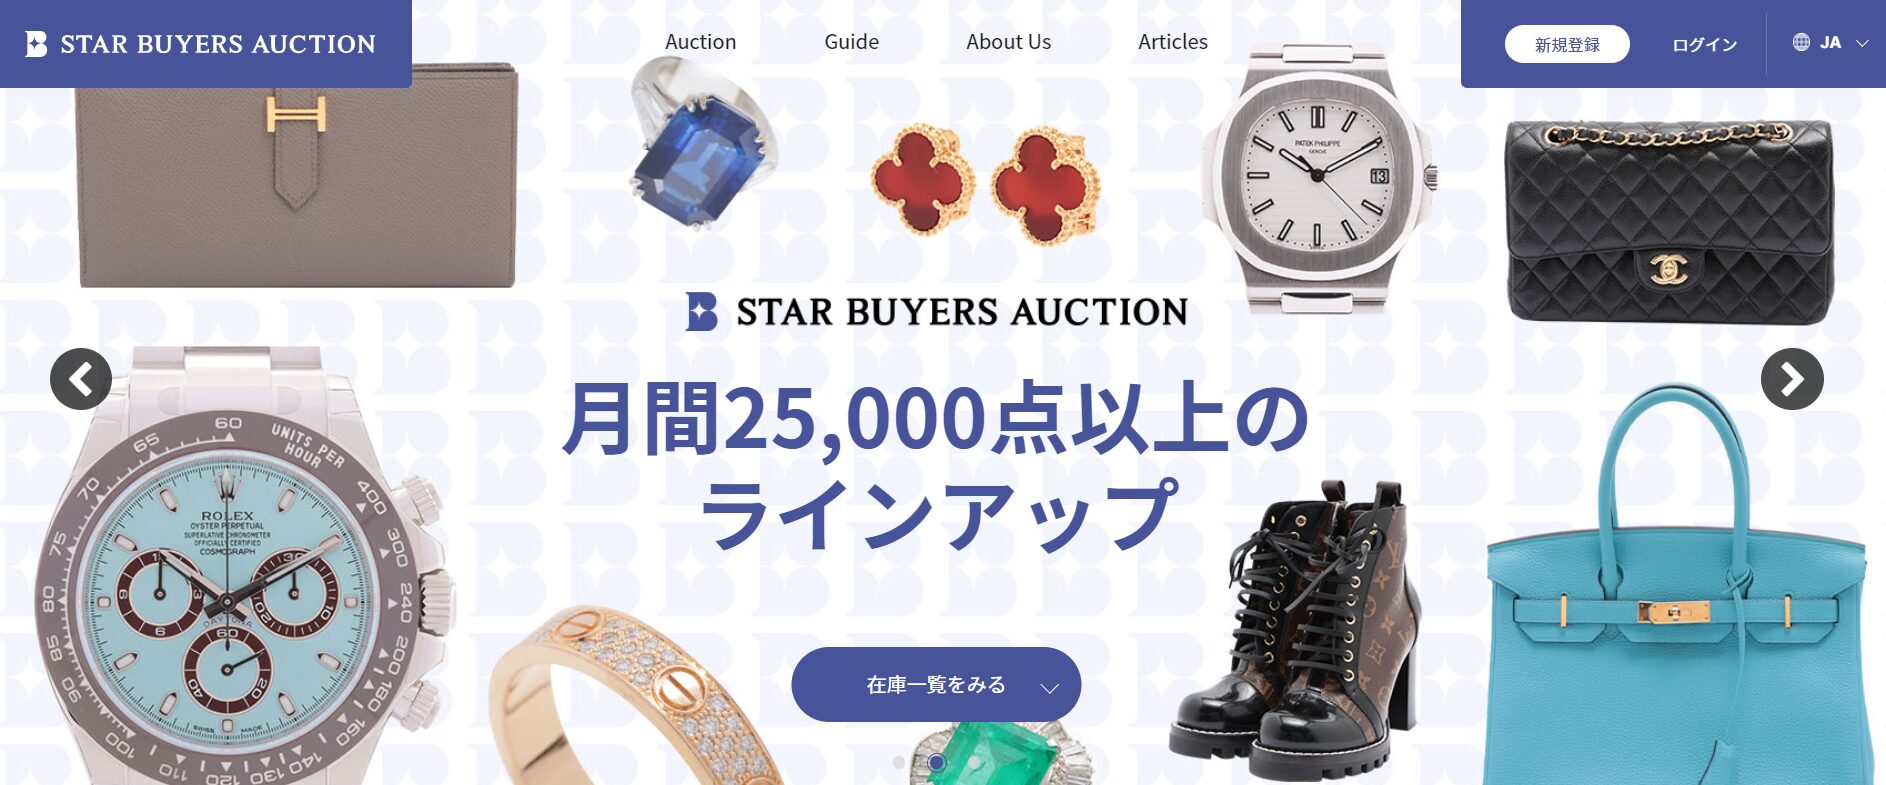 STAR BUYERS AUCTION